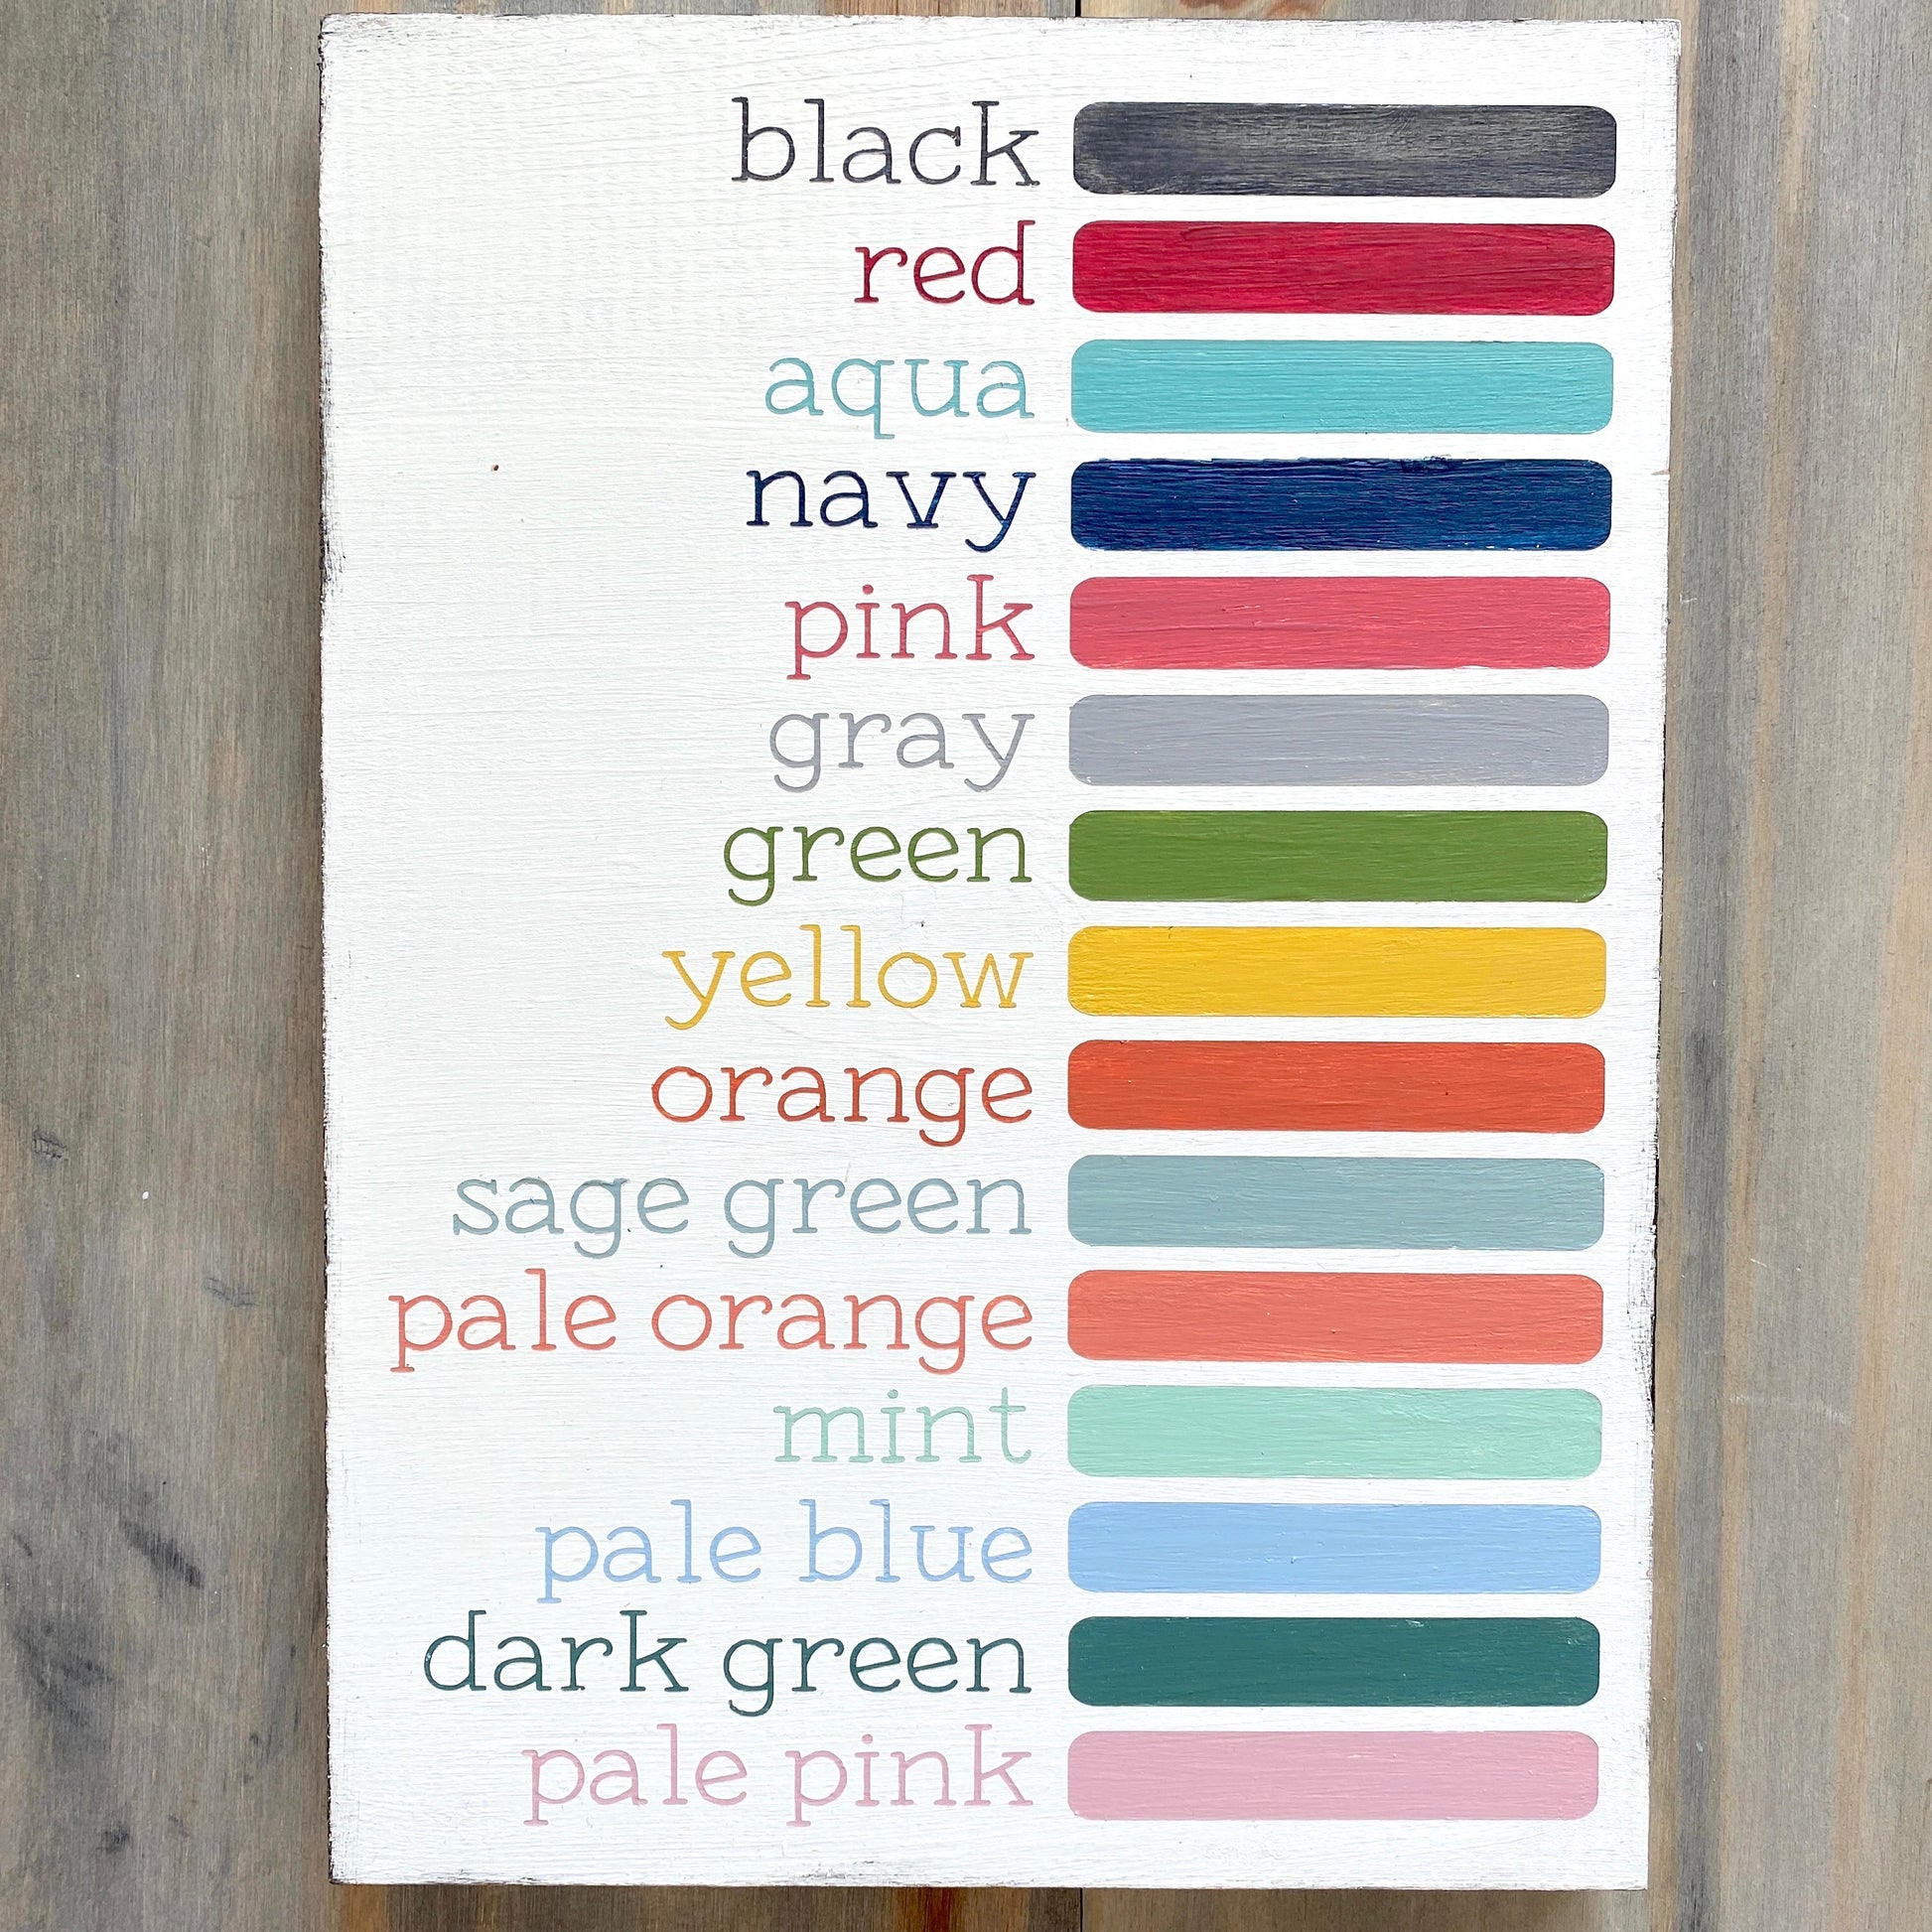 Anchored Soul Designs Color options for all signs. Painted with words for colors and color block, black, red, aqua, navy, pink, gray, green, yellow, orange, sage green, pale orange, mint, pale blue, dark green, pale pink